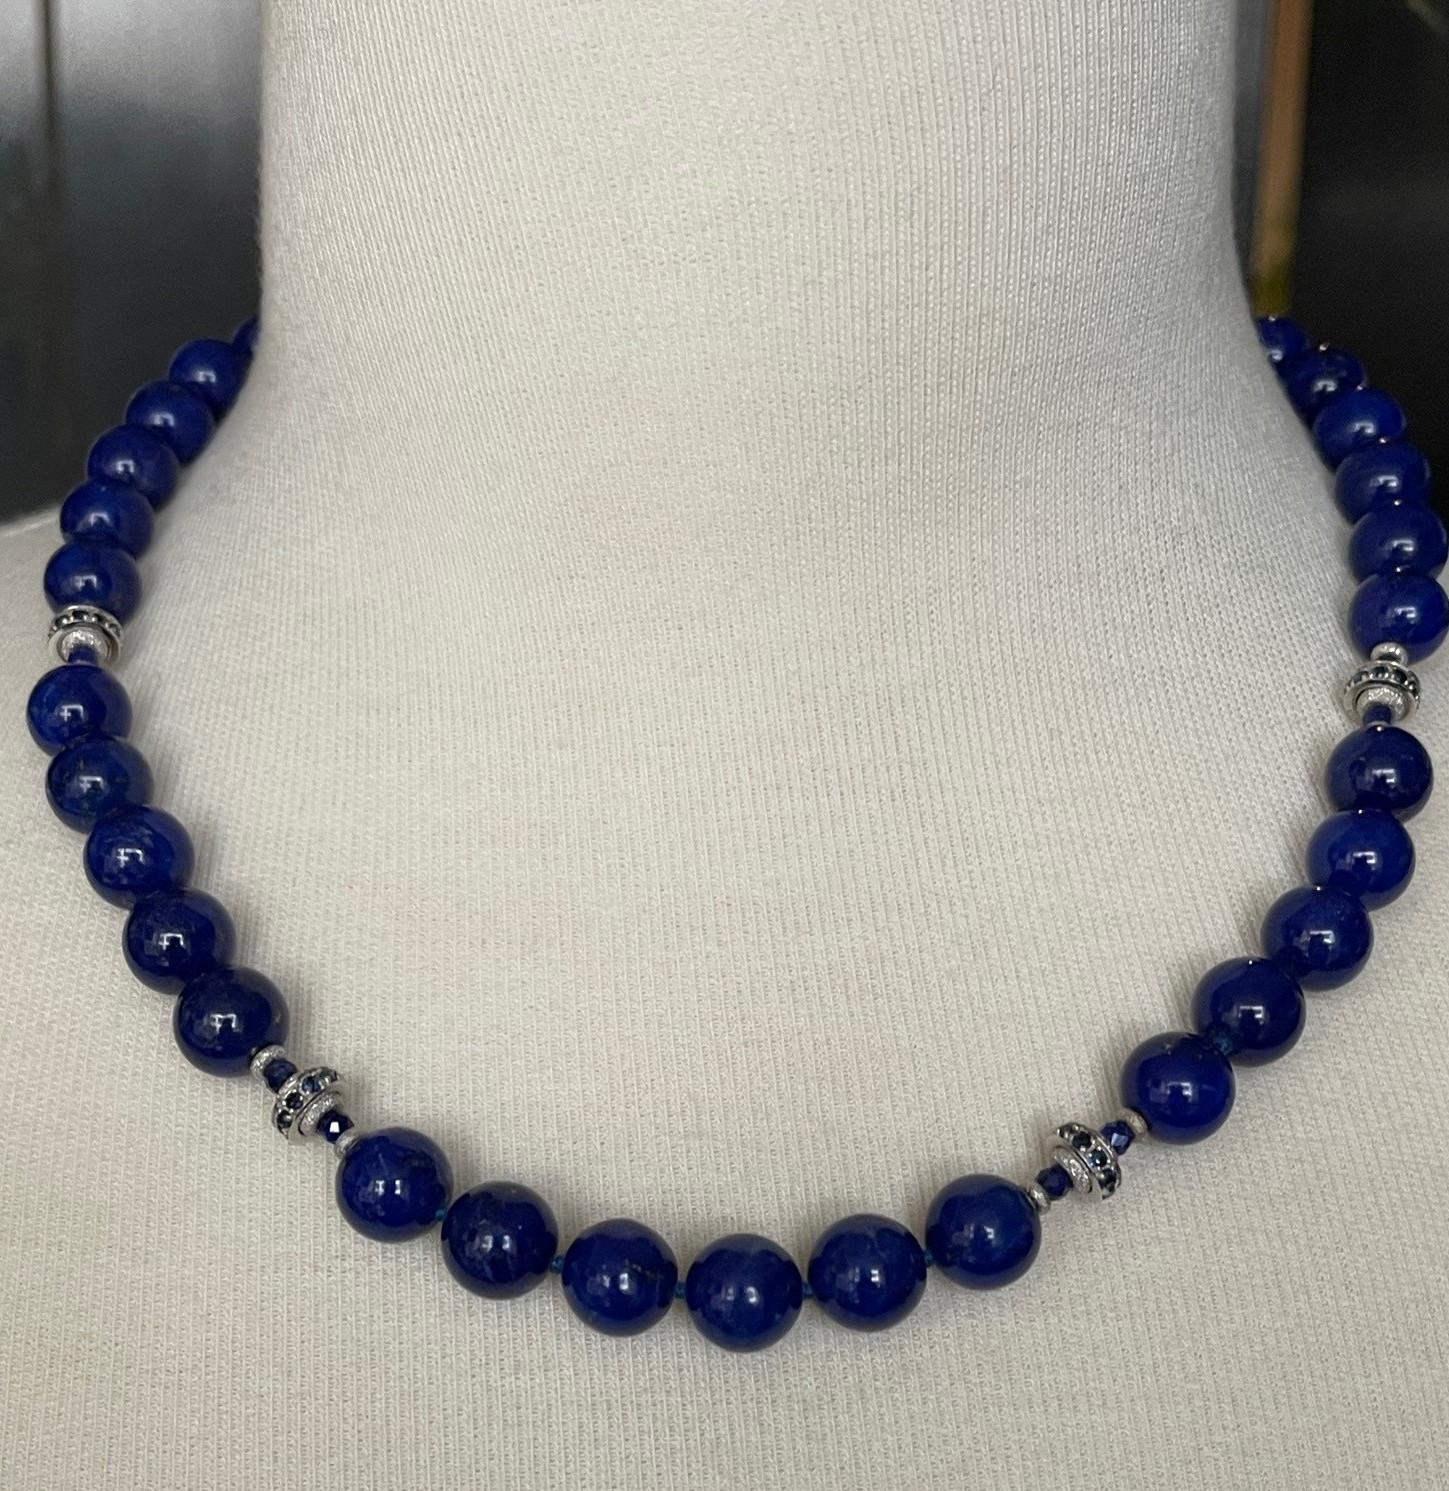 10mm Round Lapis Lazuli, Faceted Sapphire Bead & White Gold Necklace, 19 Inches For Sale 2